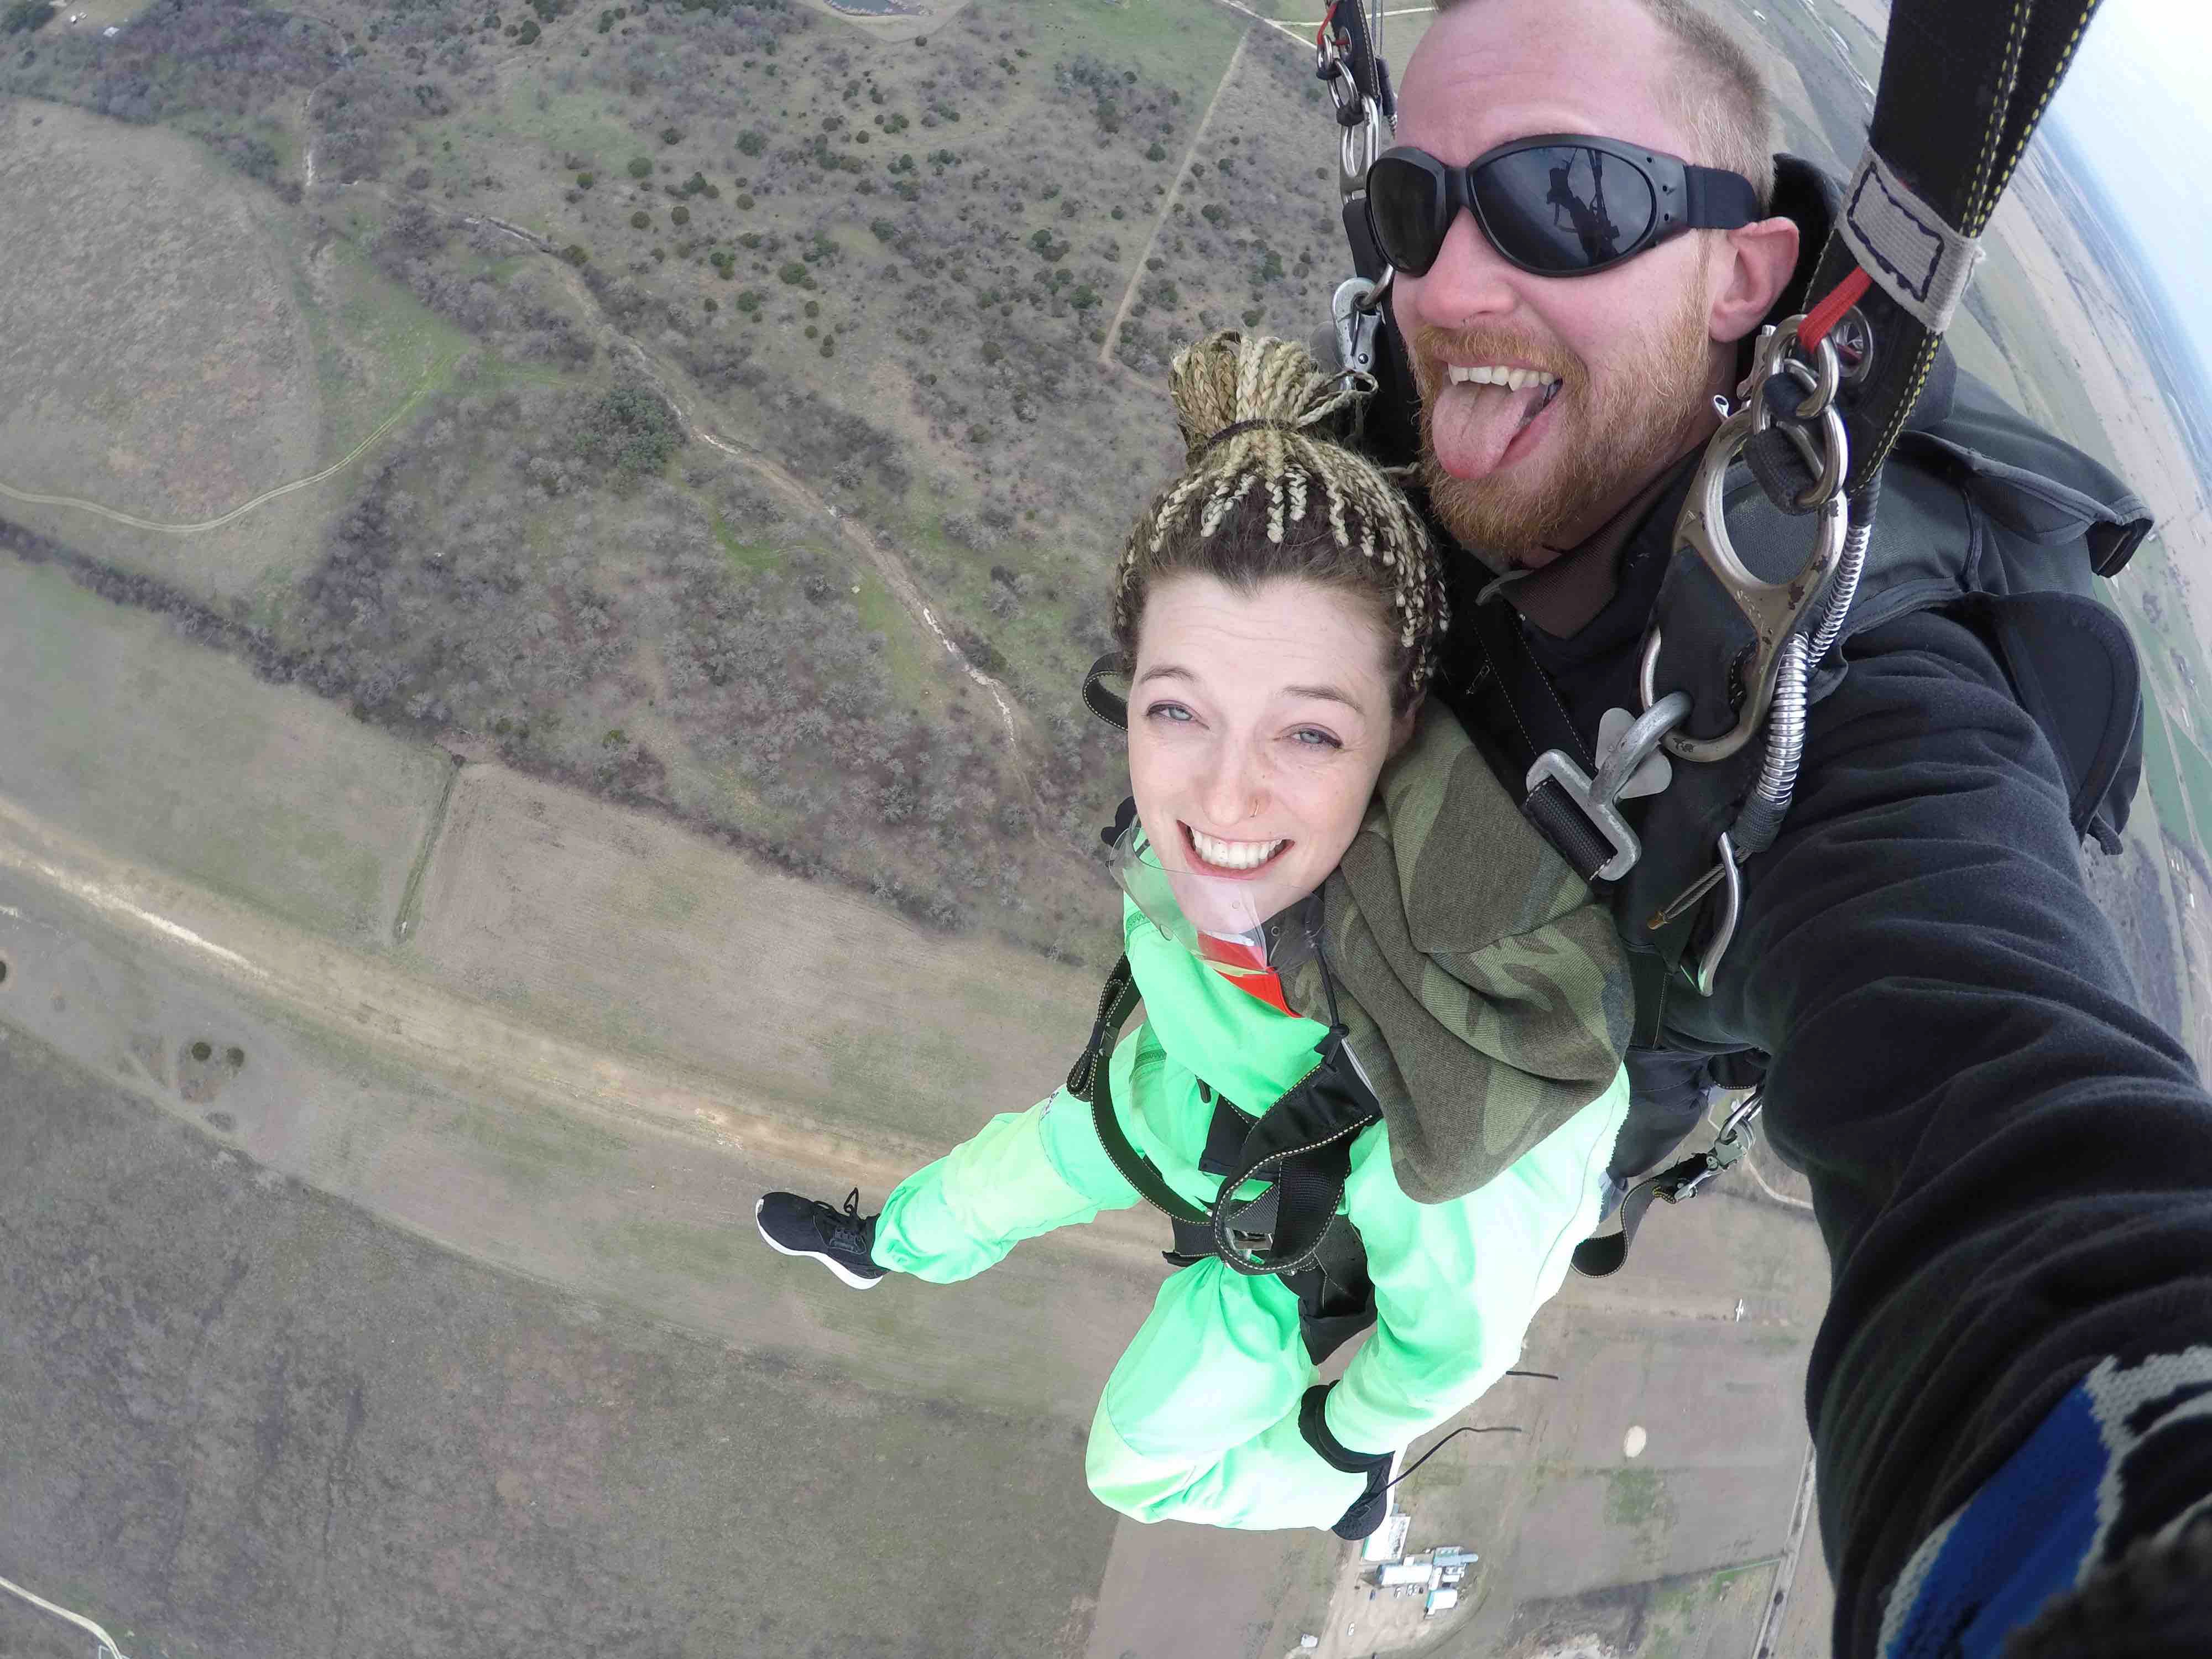 Skydive Over Cottonwood Shores